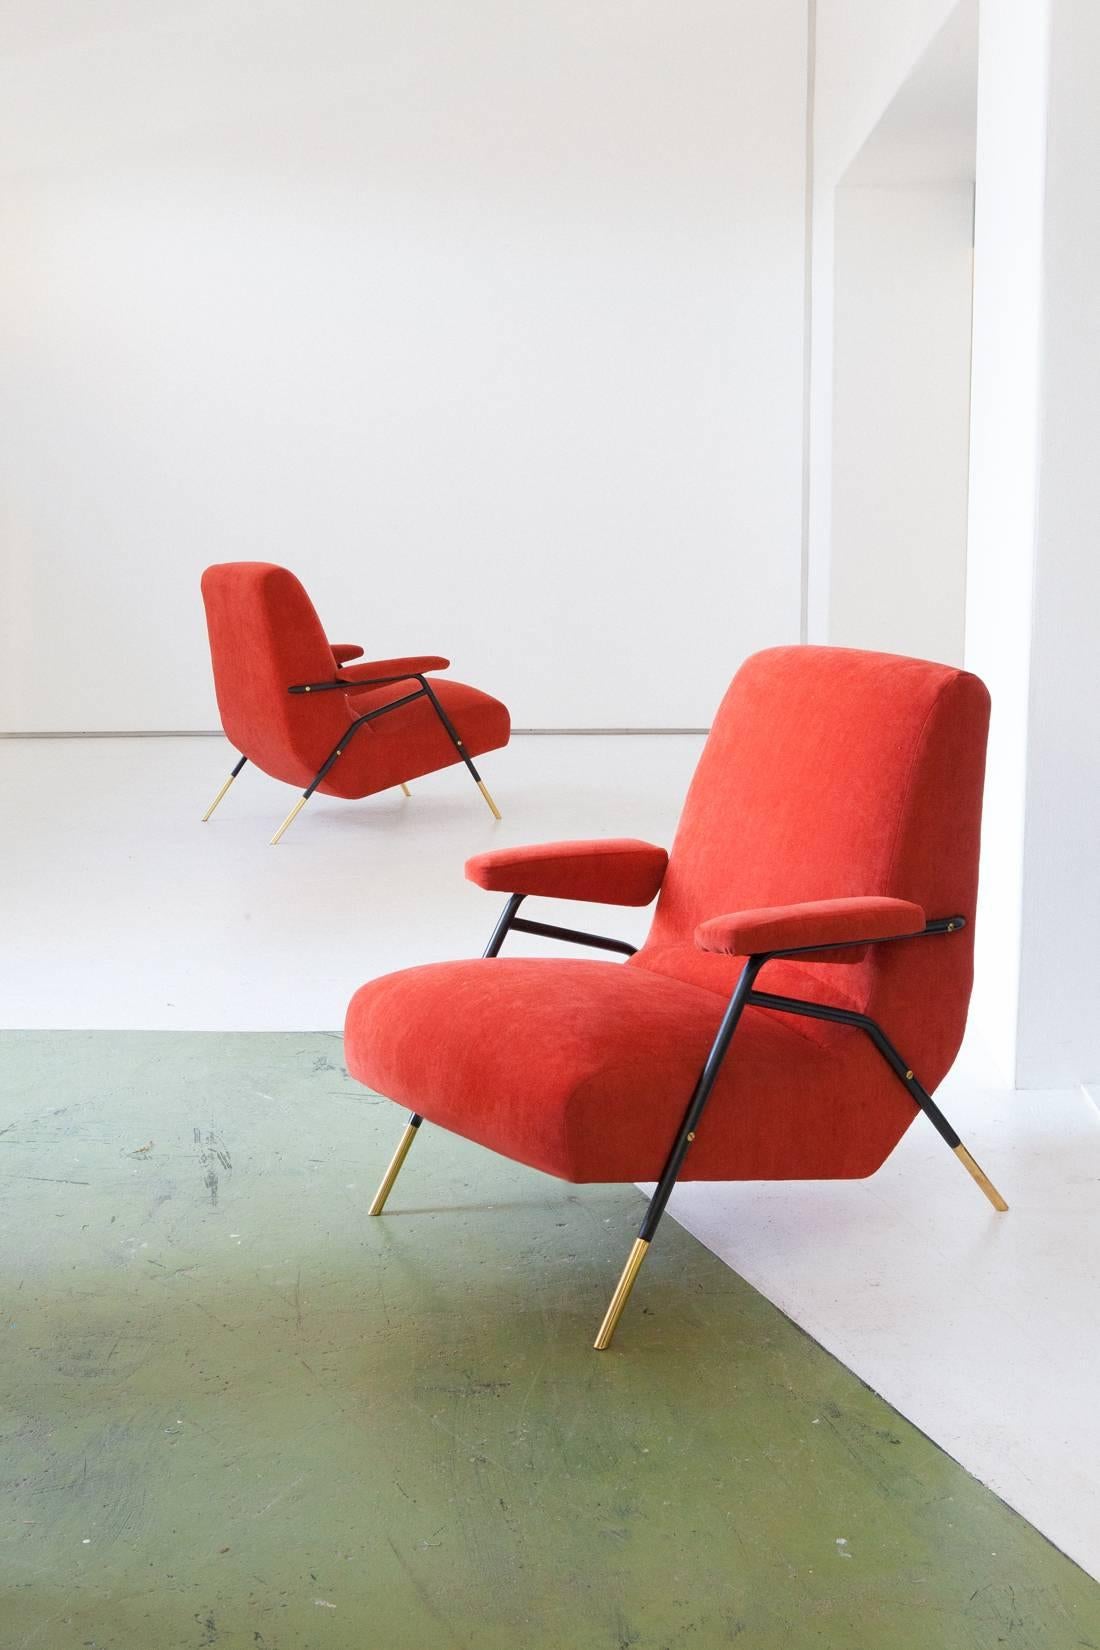 Pair of lounge chairs, Italy, 1950s
These easy chairs with armrests has a black enameled Iron and polished brass frame, new orange velvet upholstery (the orange is more closed to the red than the yellow, also the padding is replaced).
This